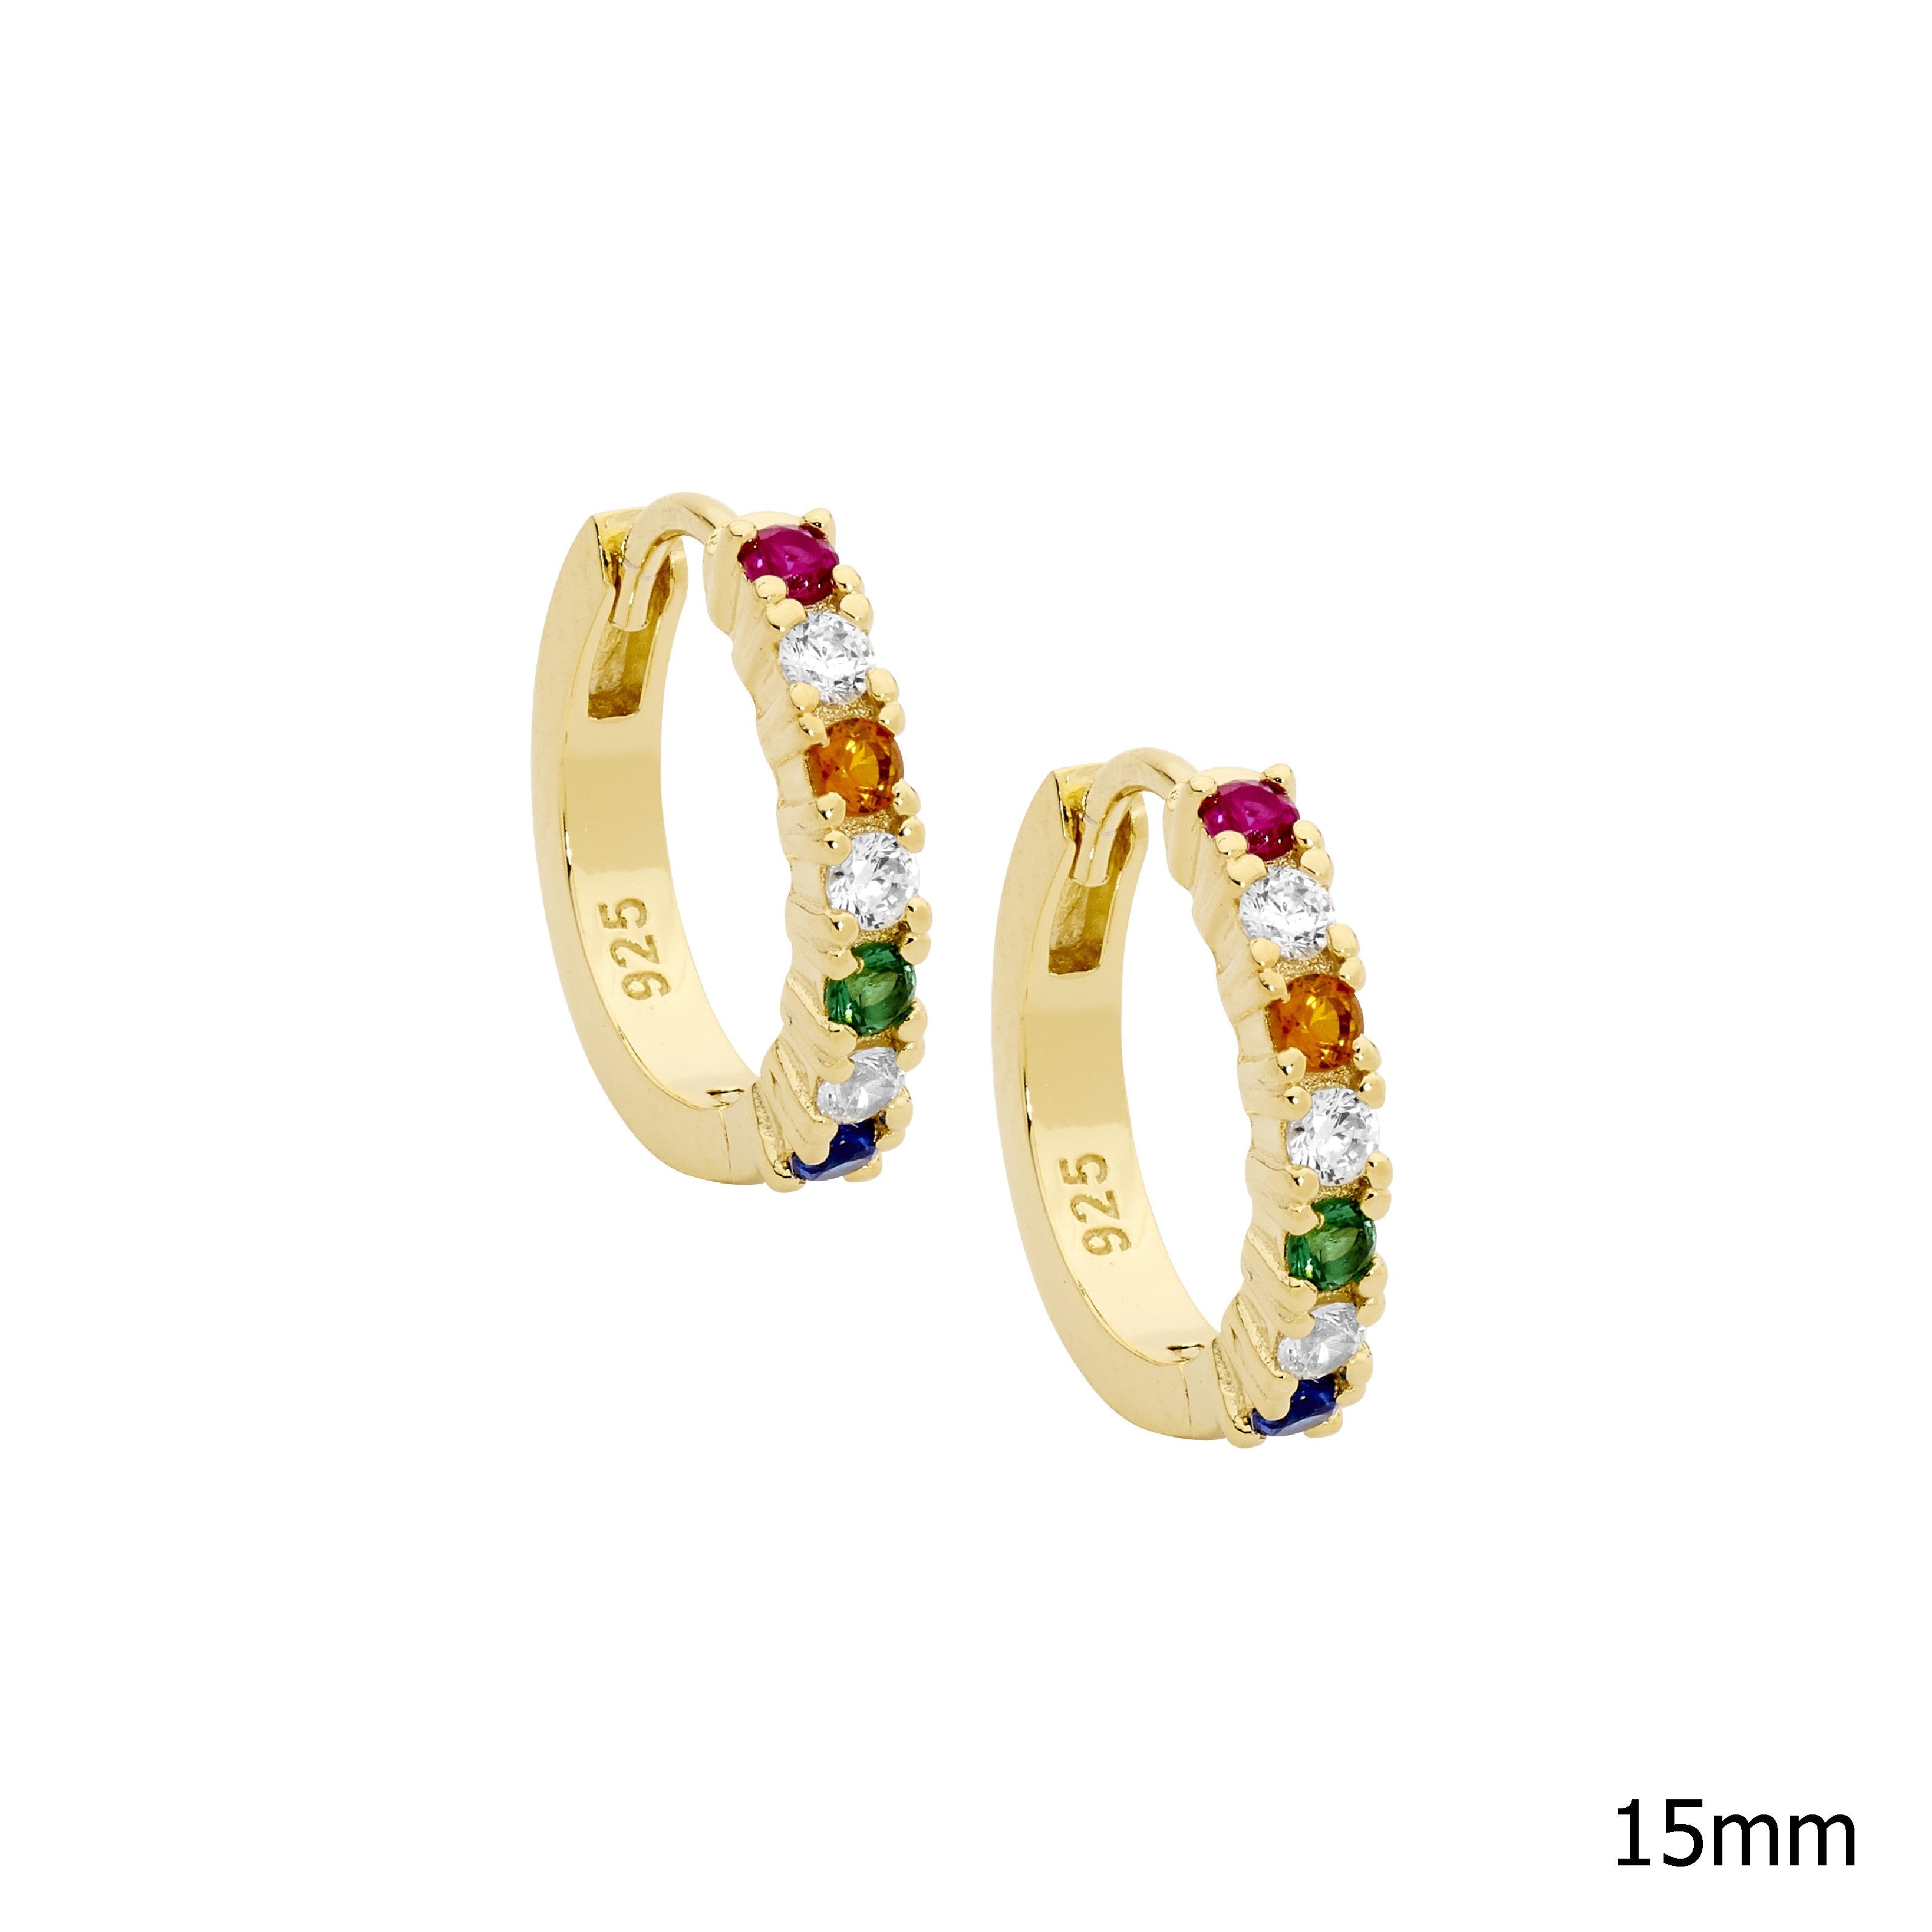 Sterling Silver & Multi Colour Cubic Zirconia 14mm Hoop Earrings With Gold Plating 